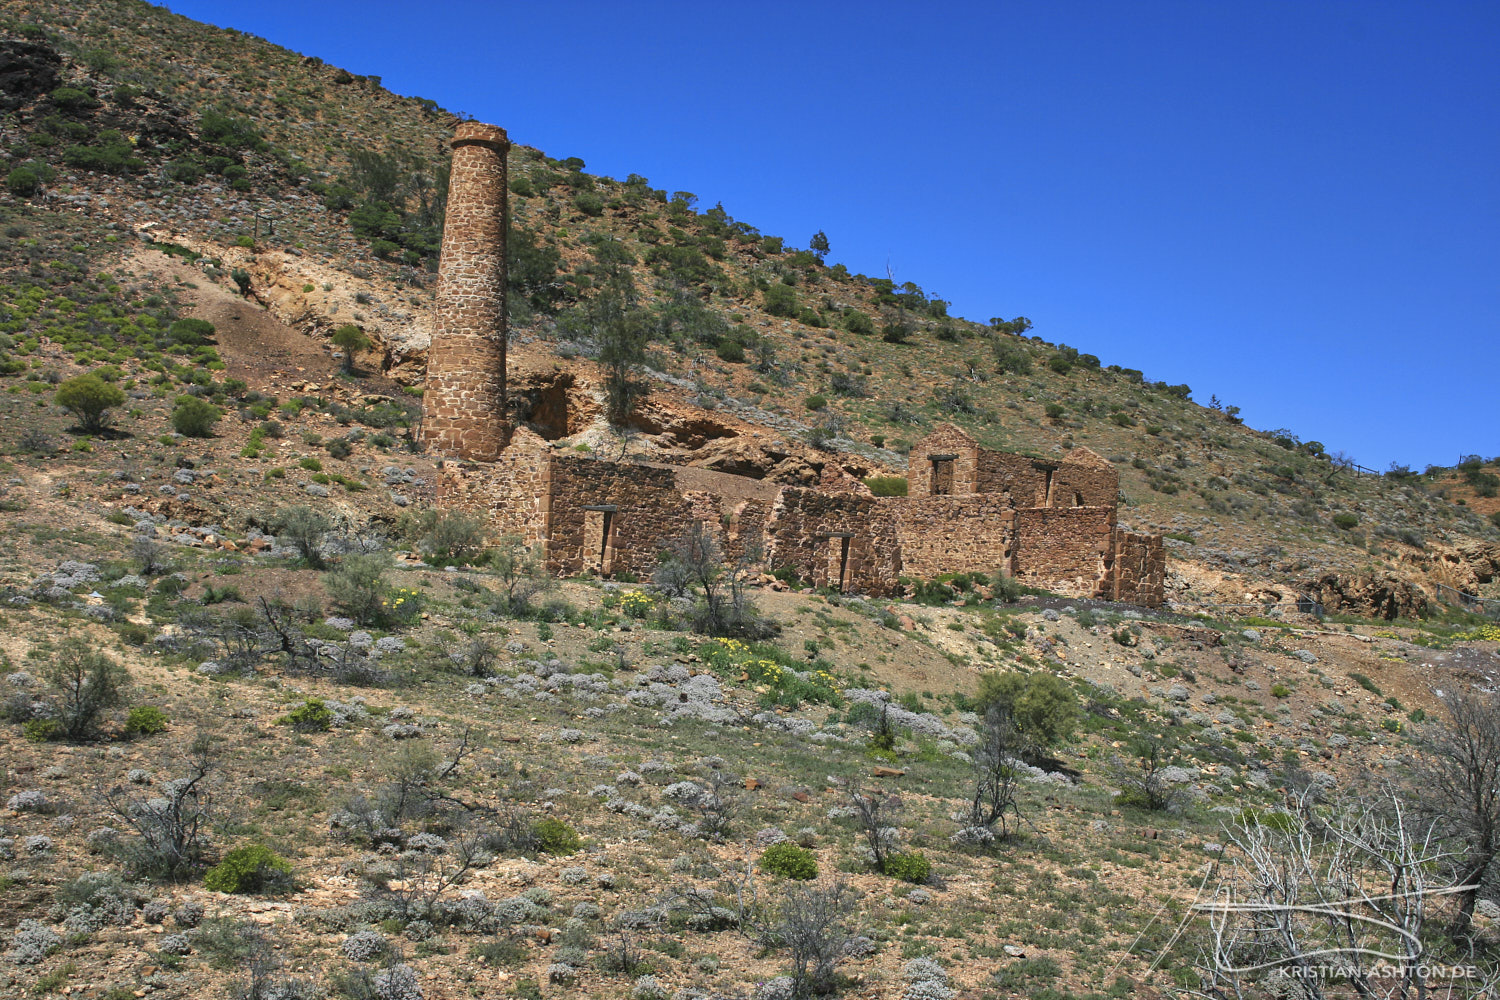 The abandoned Nuccaleena copper mine and settlement